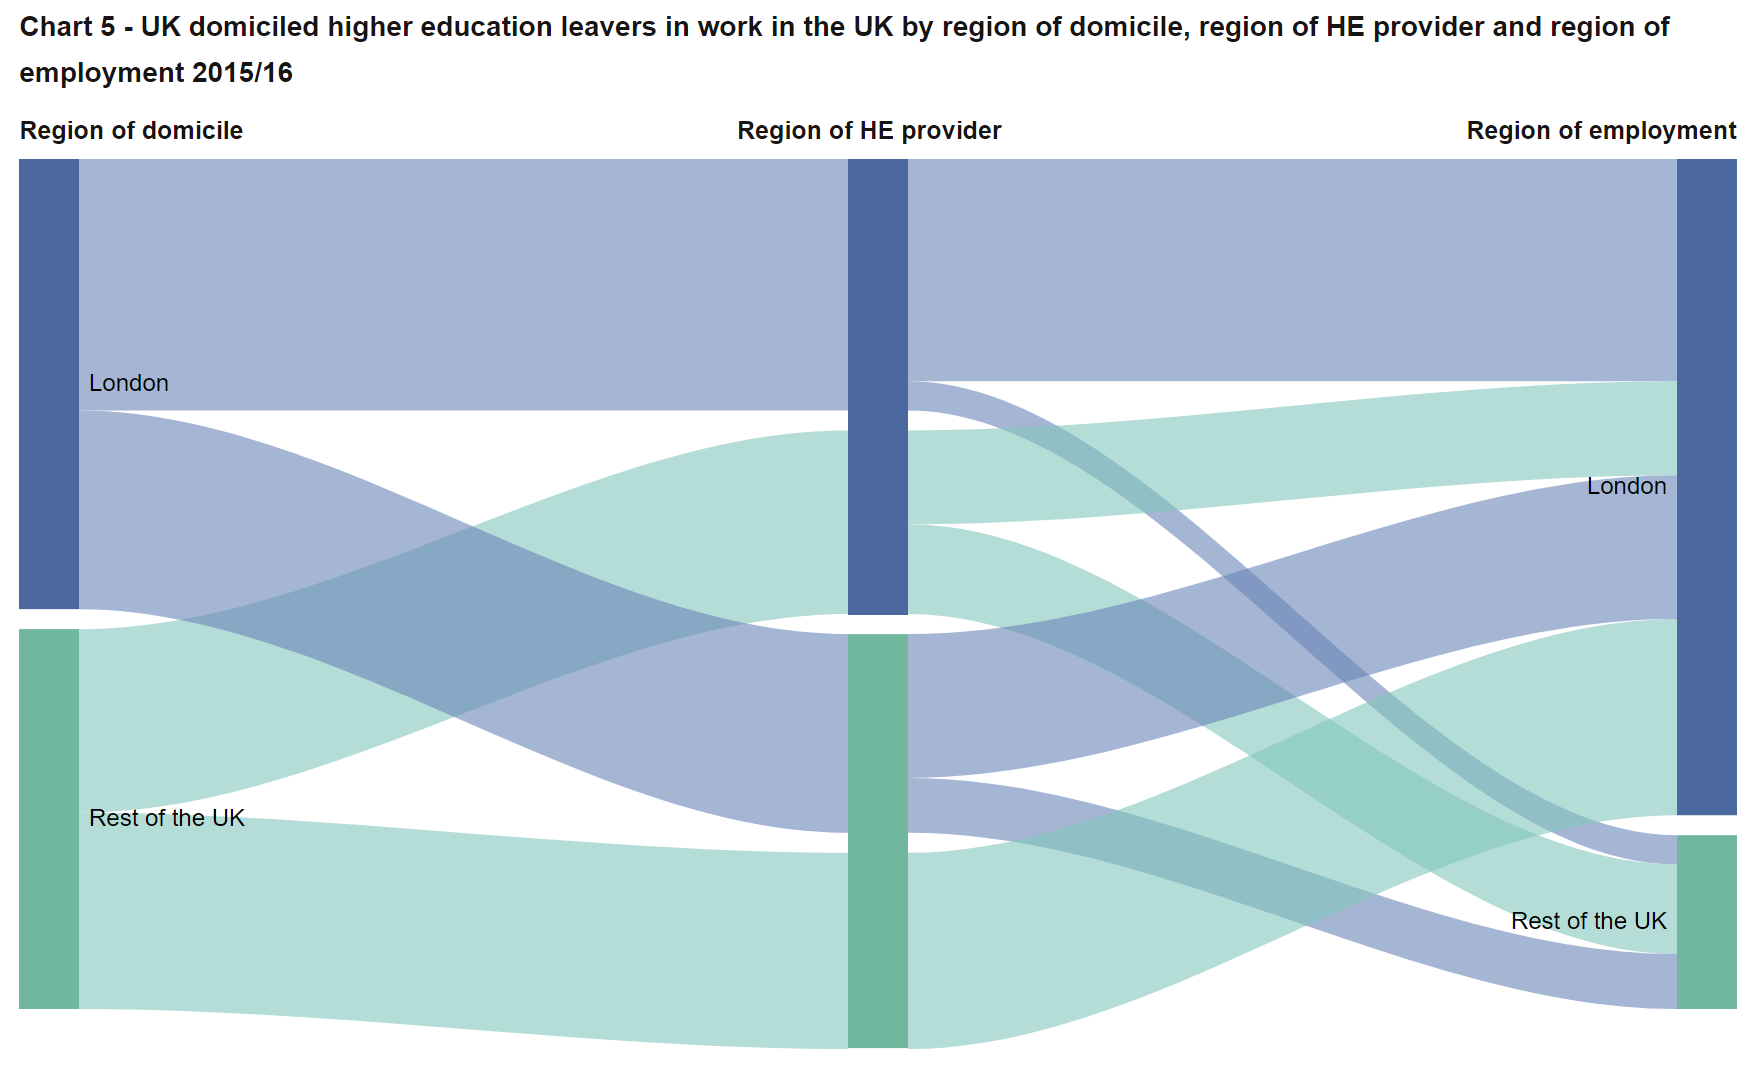 Flow of students and graduates who either originate from, study in or work in London 